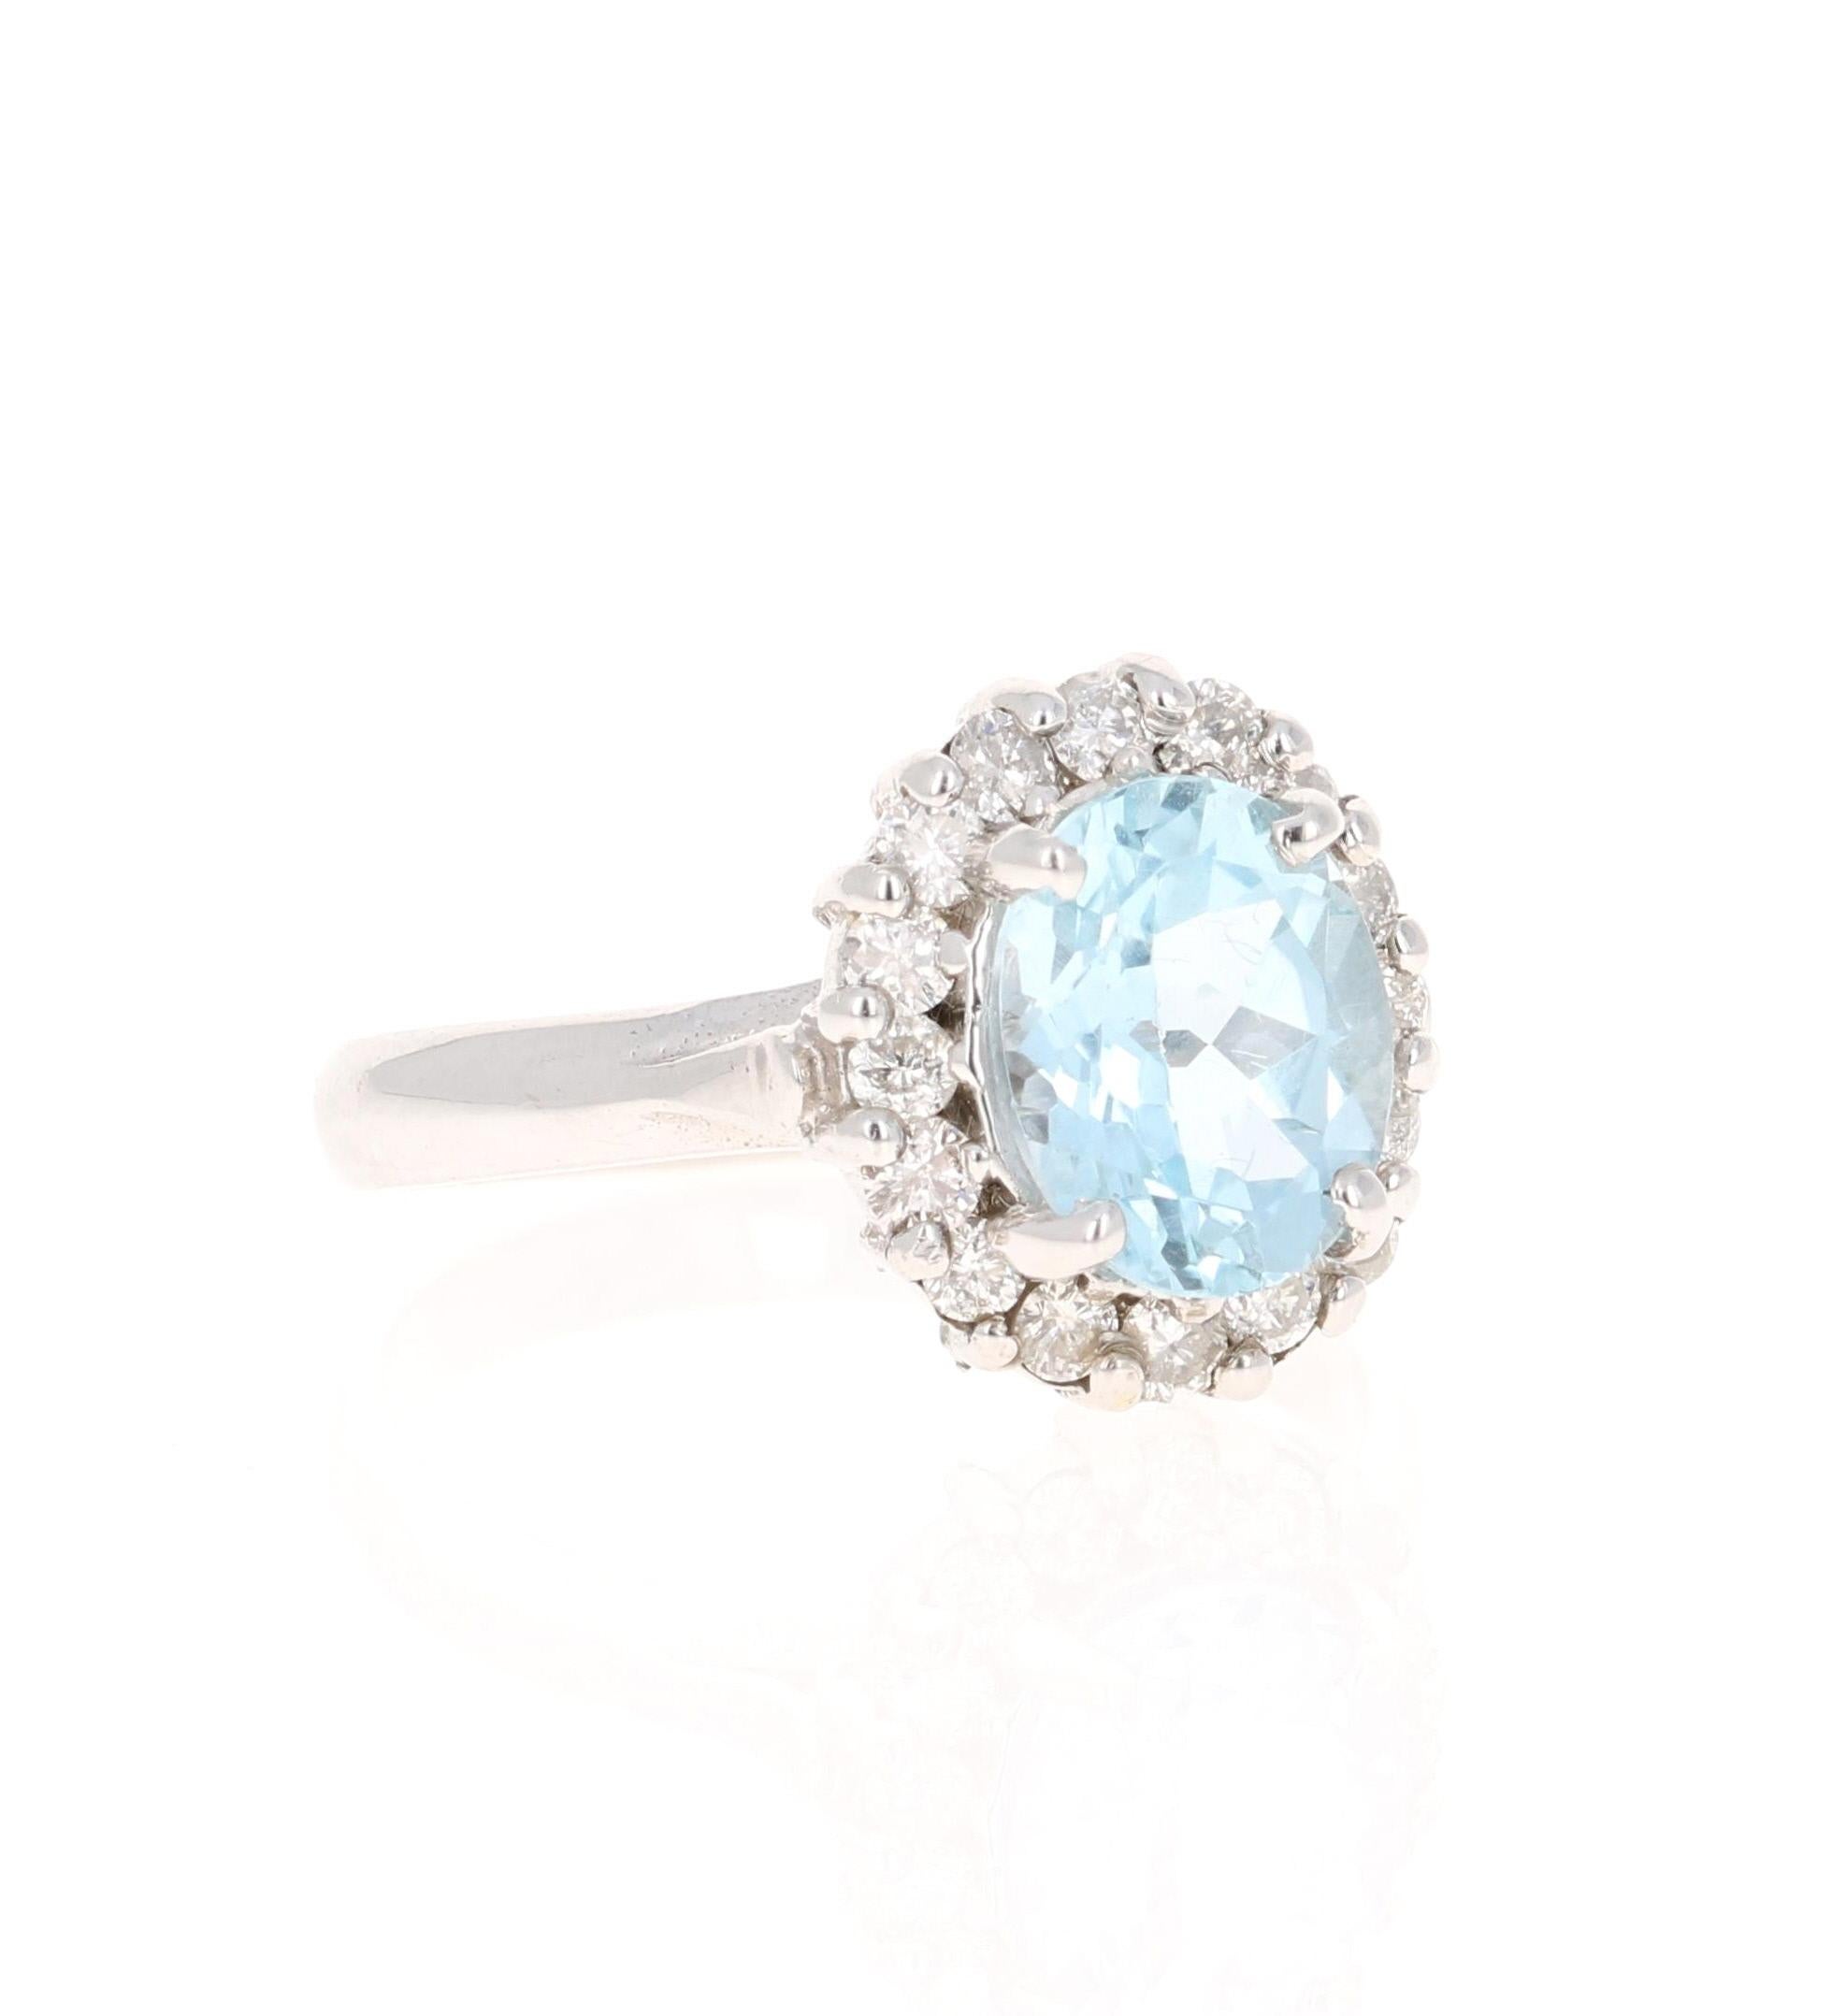 This ring has a pretty 2.31 carat gorgeous Oval Cut Aquamarine set in the center of the ring and is surrounded by 16 Round Brilliant Cut Diamonds that weigh 0.60 carats. The total carat weight of the ring is 2.91 carats. The Clarity of the Diamonds